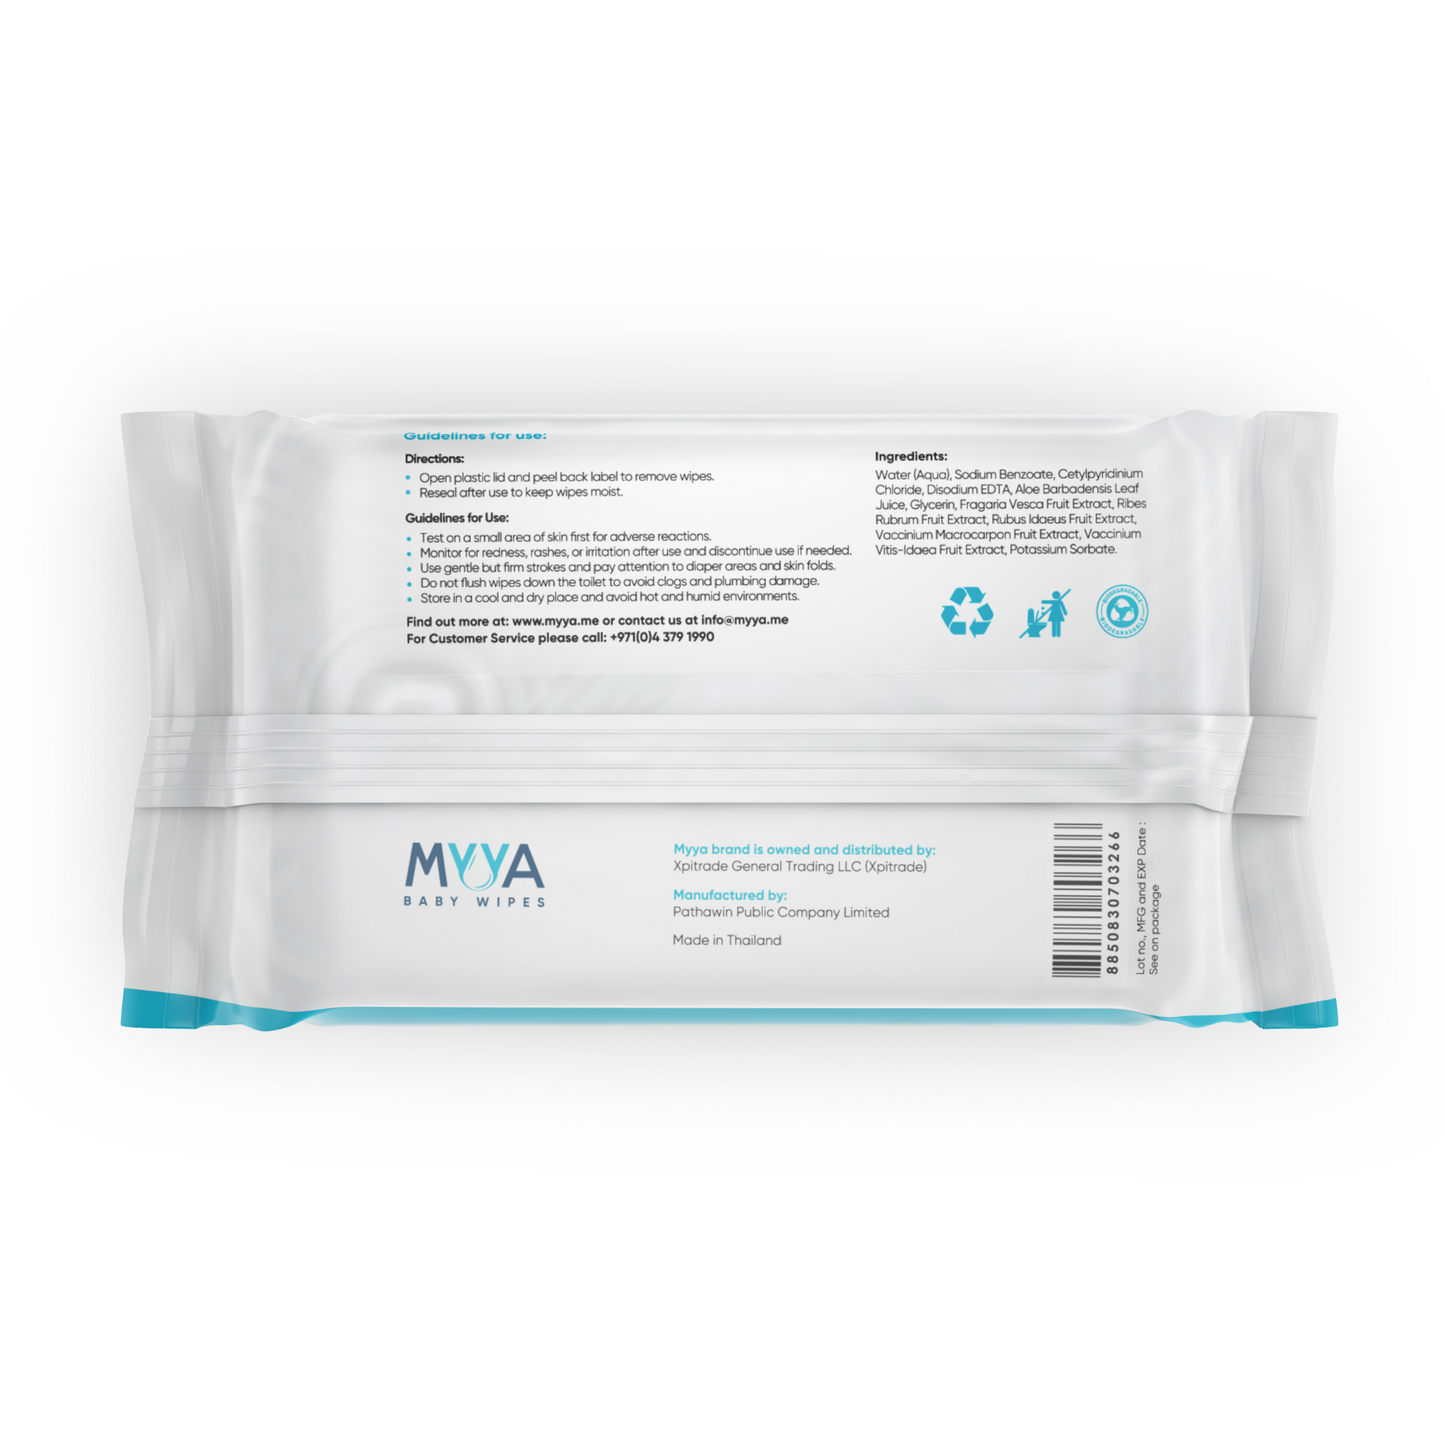 Myya Baby Wipes: Biodegradable and Chemical-Free, 80 Sheet Count